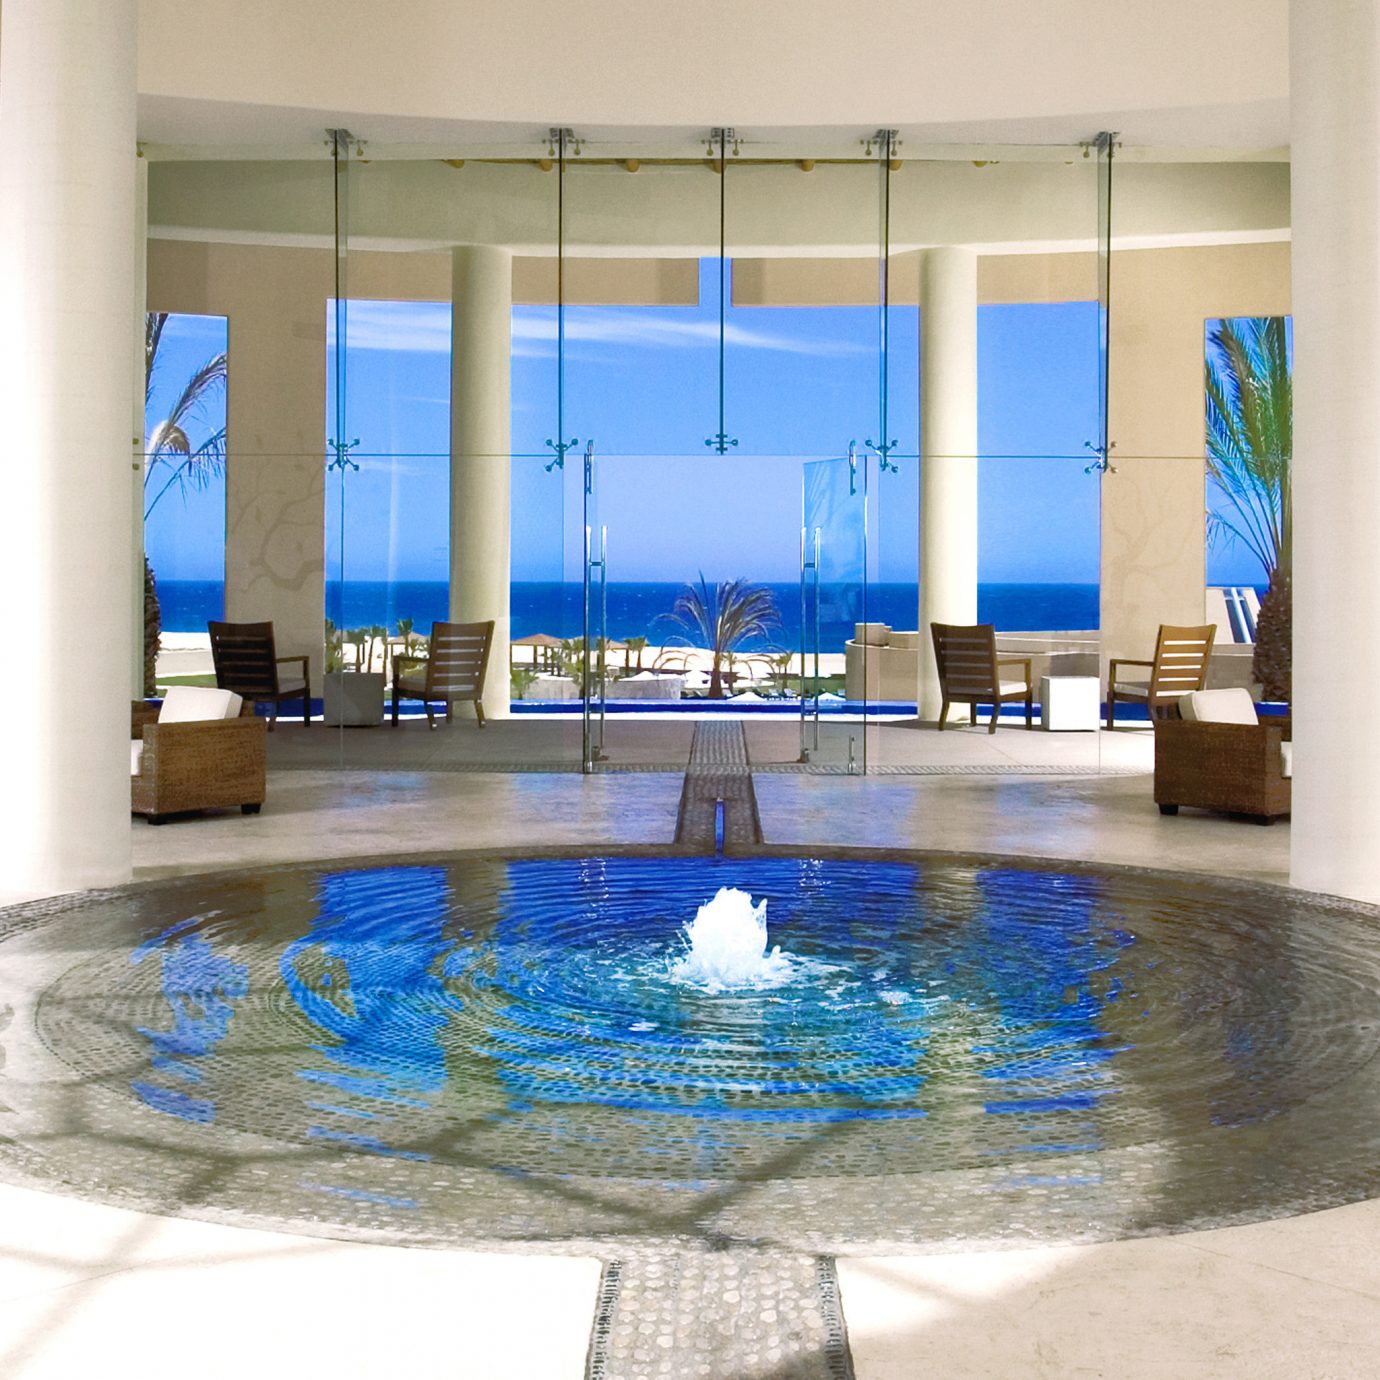 Adult-only All-inclusive Honeymoon Lobby Romance Romantic Scenic views Tropical Waterfront swimming pool property Pool glass modern art flooring Resort